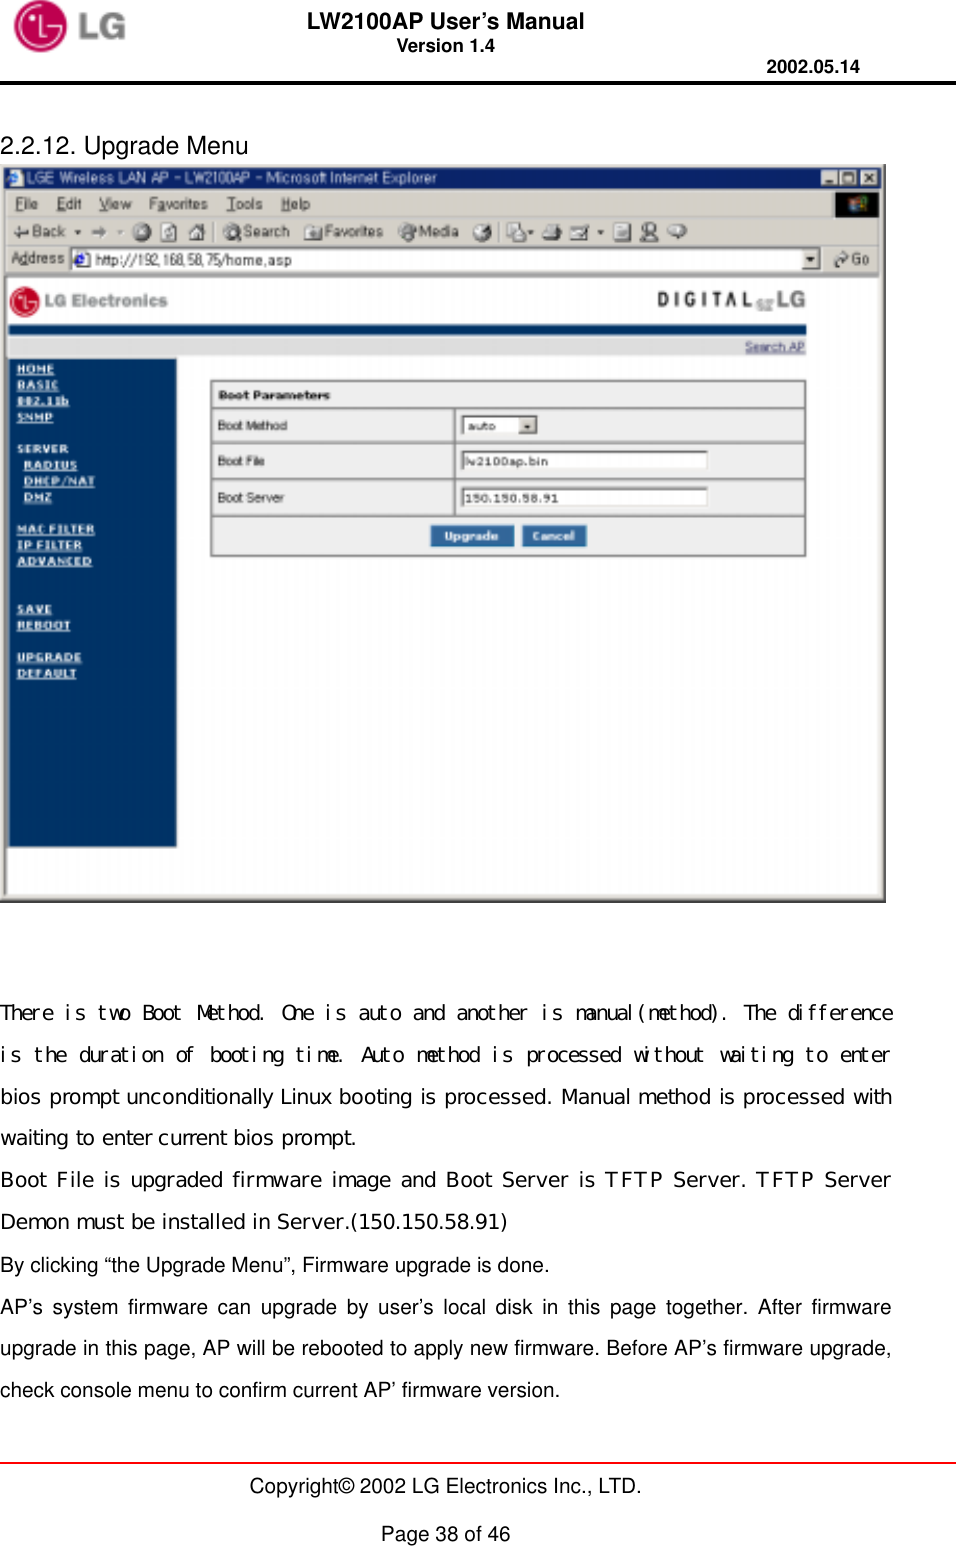 LW2100AP User’s Manual Version 1.4 2002.05.14   Copyright© 2002 LG Electronics Inc., LTD.  Page 38 of 46  2.2.12. Upgrade Menu    There is two Boot Method. One is auto and another is manual(method). The difference is the duration of booting time. Auto method is processed without waiting to enter bios prompt unconditionally Linux booting is processed. Manual method is processed with waiting to enter current bios prompt. Boot File is upgraded firmware image and Boot Server is TFTP Server. TFTP Server Demon must be installed in Server.(150.150.58.91) By clicking “the Upgrade Menu”, Firmware upgrade is done. AP’s system firmware can upgrade by user’s local disk in this page together. After firmware upgrade in this page, AP will be rebooted to apply new firmware. Before AP’s firmware upgrade, check console menu to confirm current AP’ firmware version.  